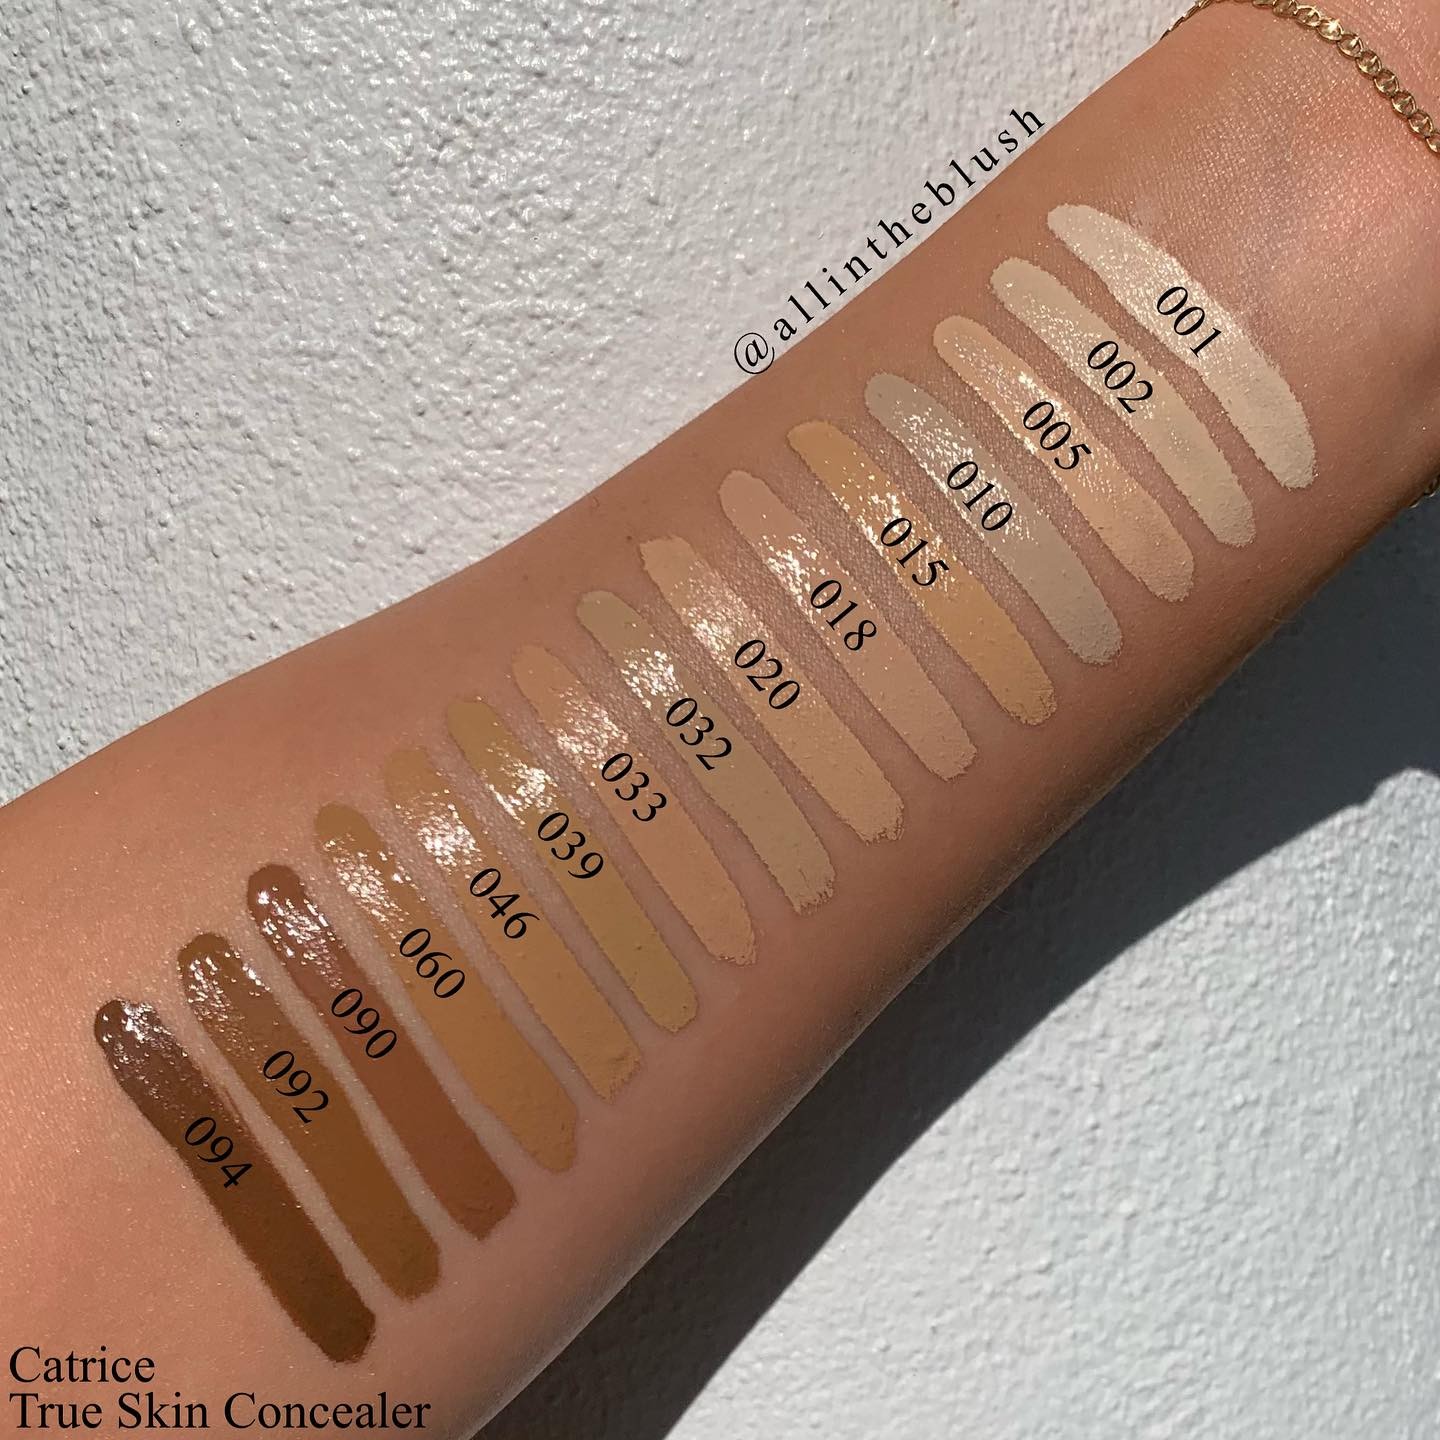 Catrice True Skin High Cover Concealer Review & Swatches - All In The Blush